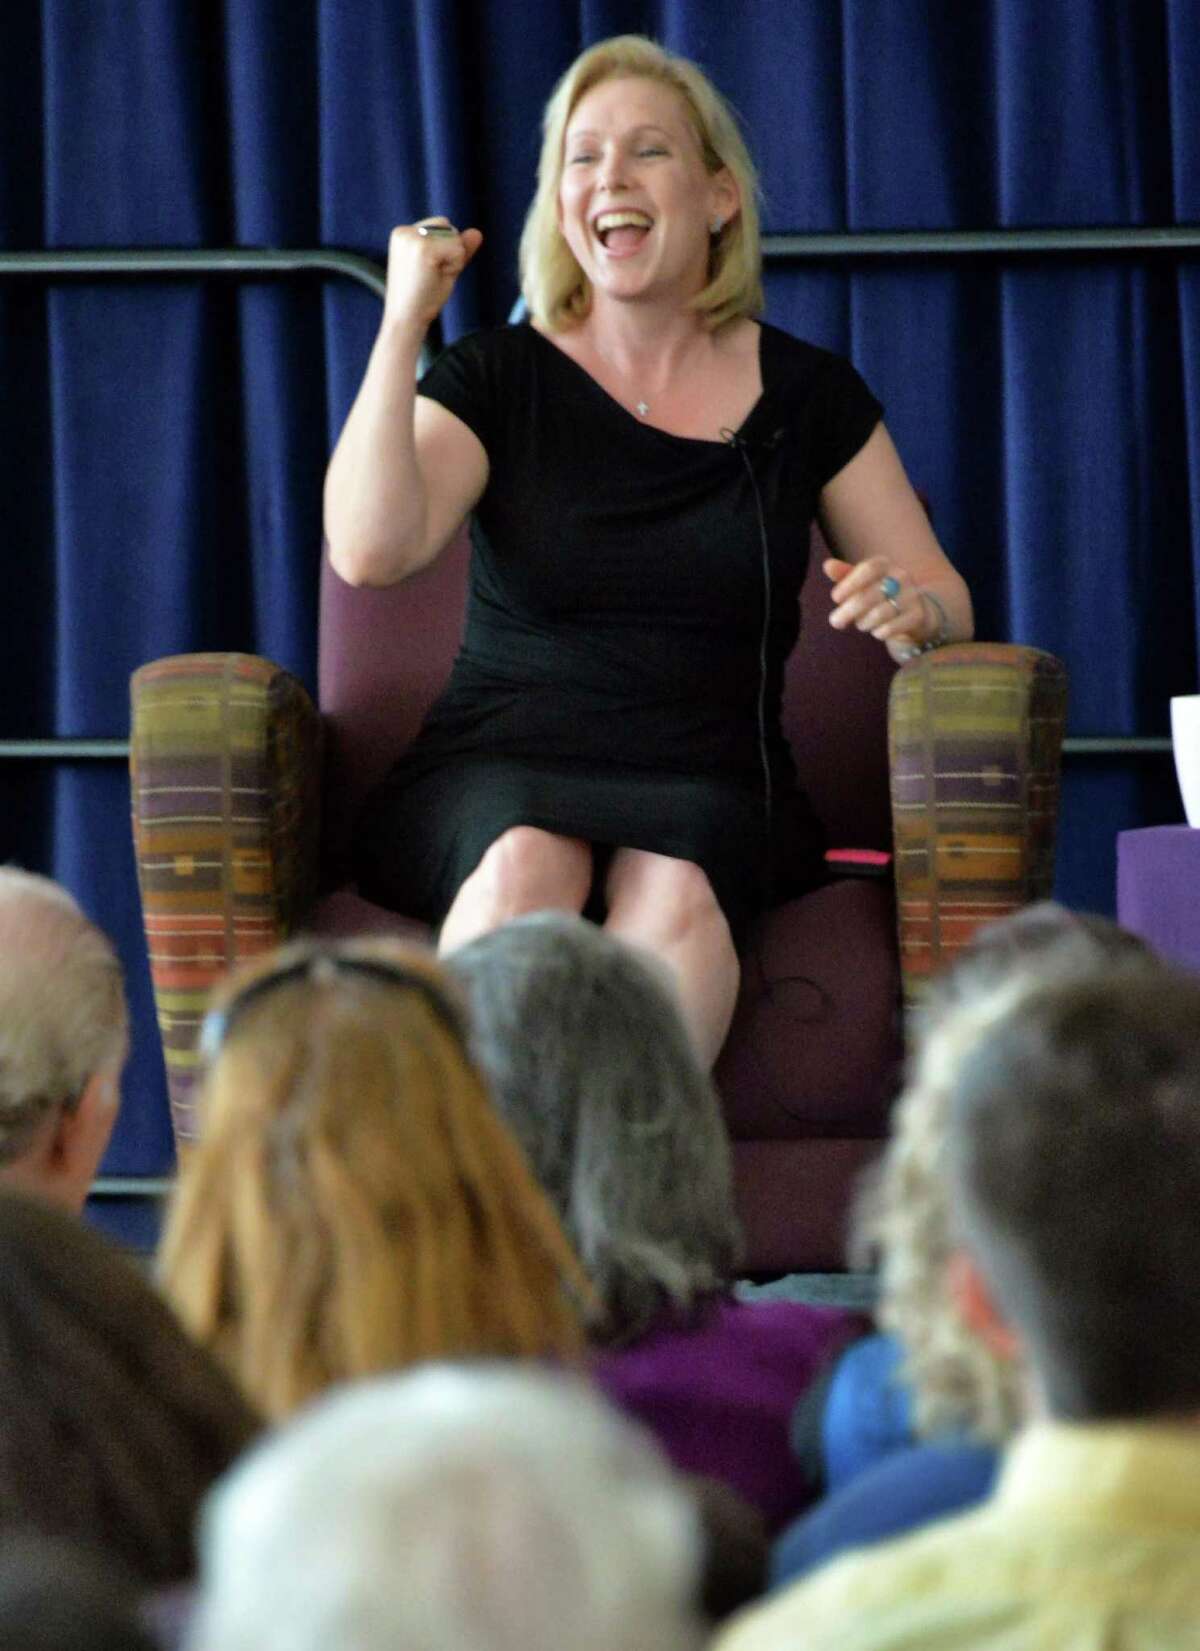 Kirsten Gillibrand, U.S. Senator and author, speaks during a NYS Writer's Institute Visiting Authors series at UAlbany Saturday Sept. 27, 2014, in Albany, NY. (John Carl D'Annibale / Times Union)